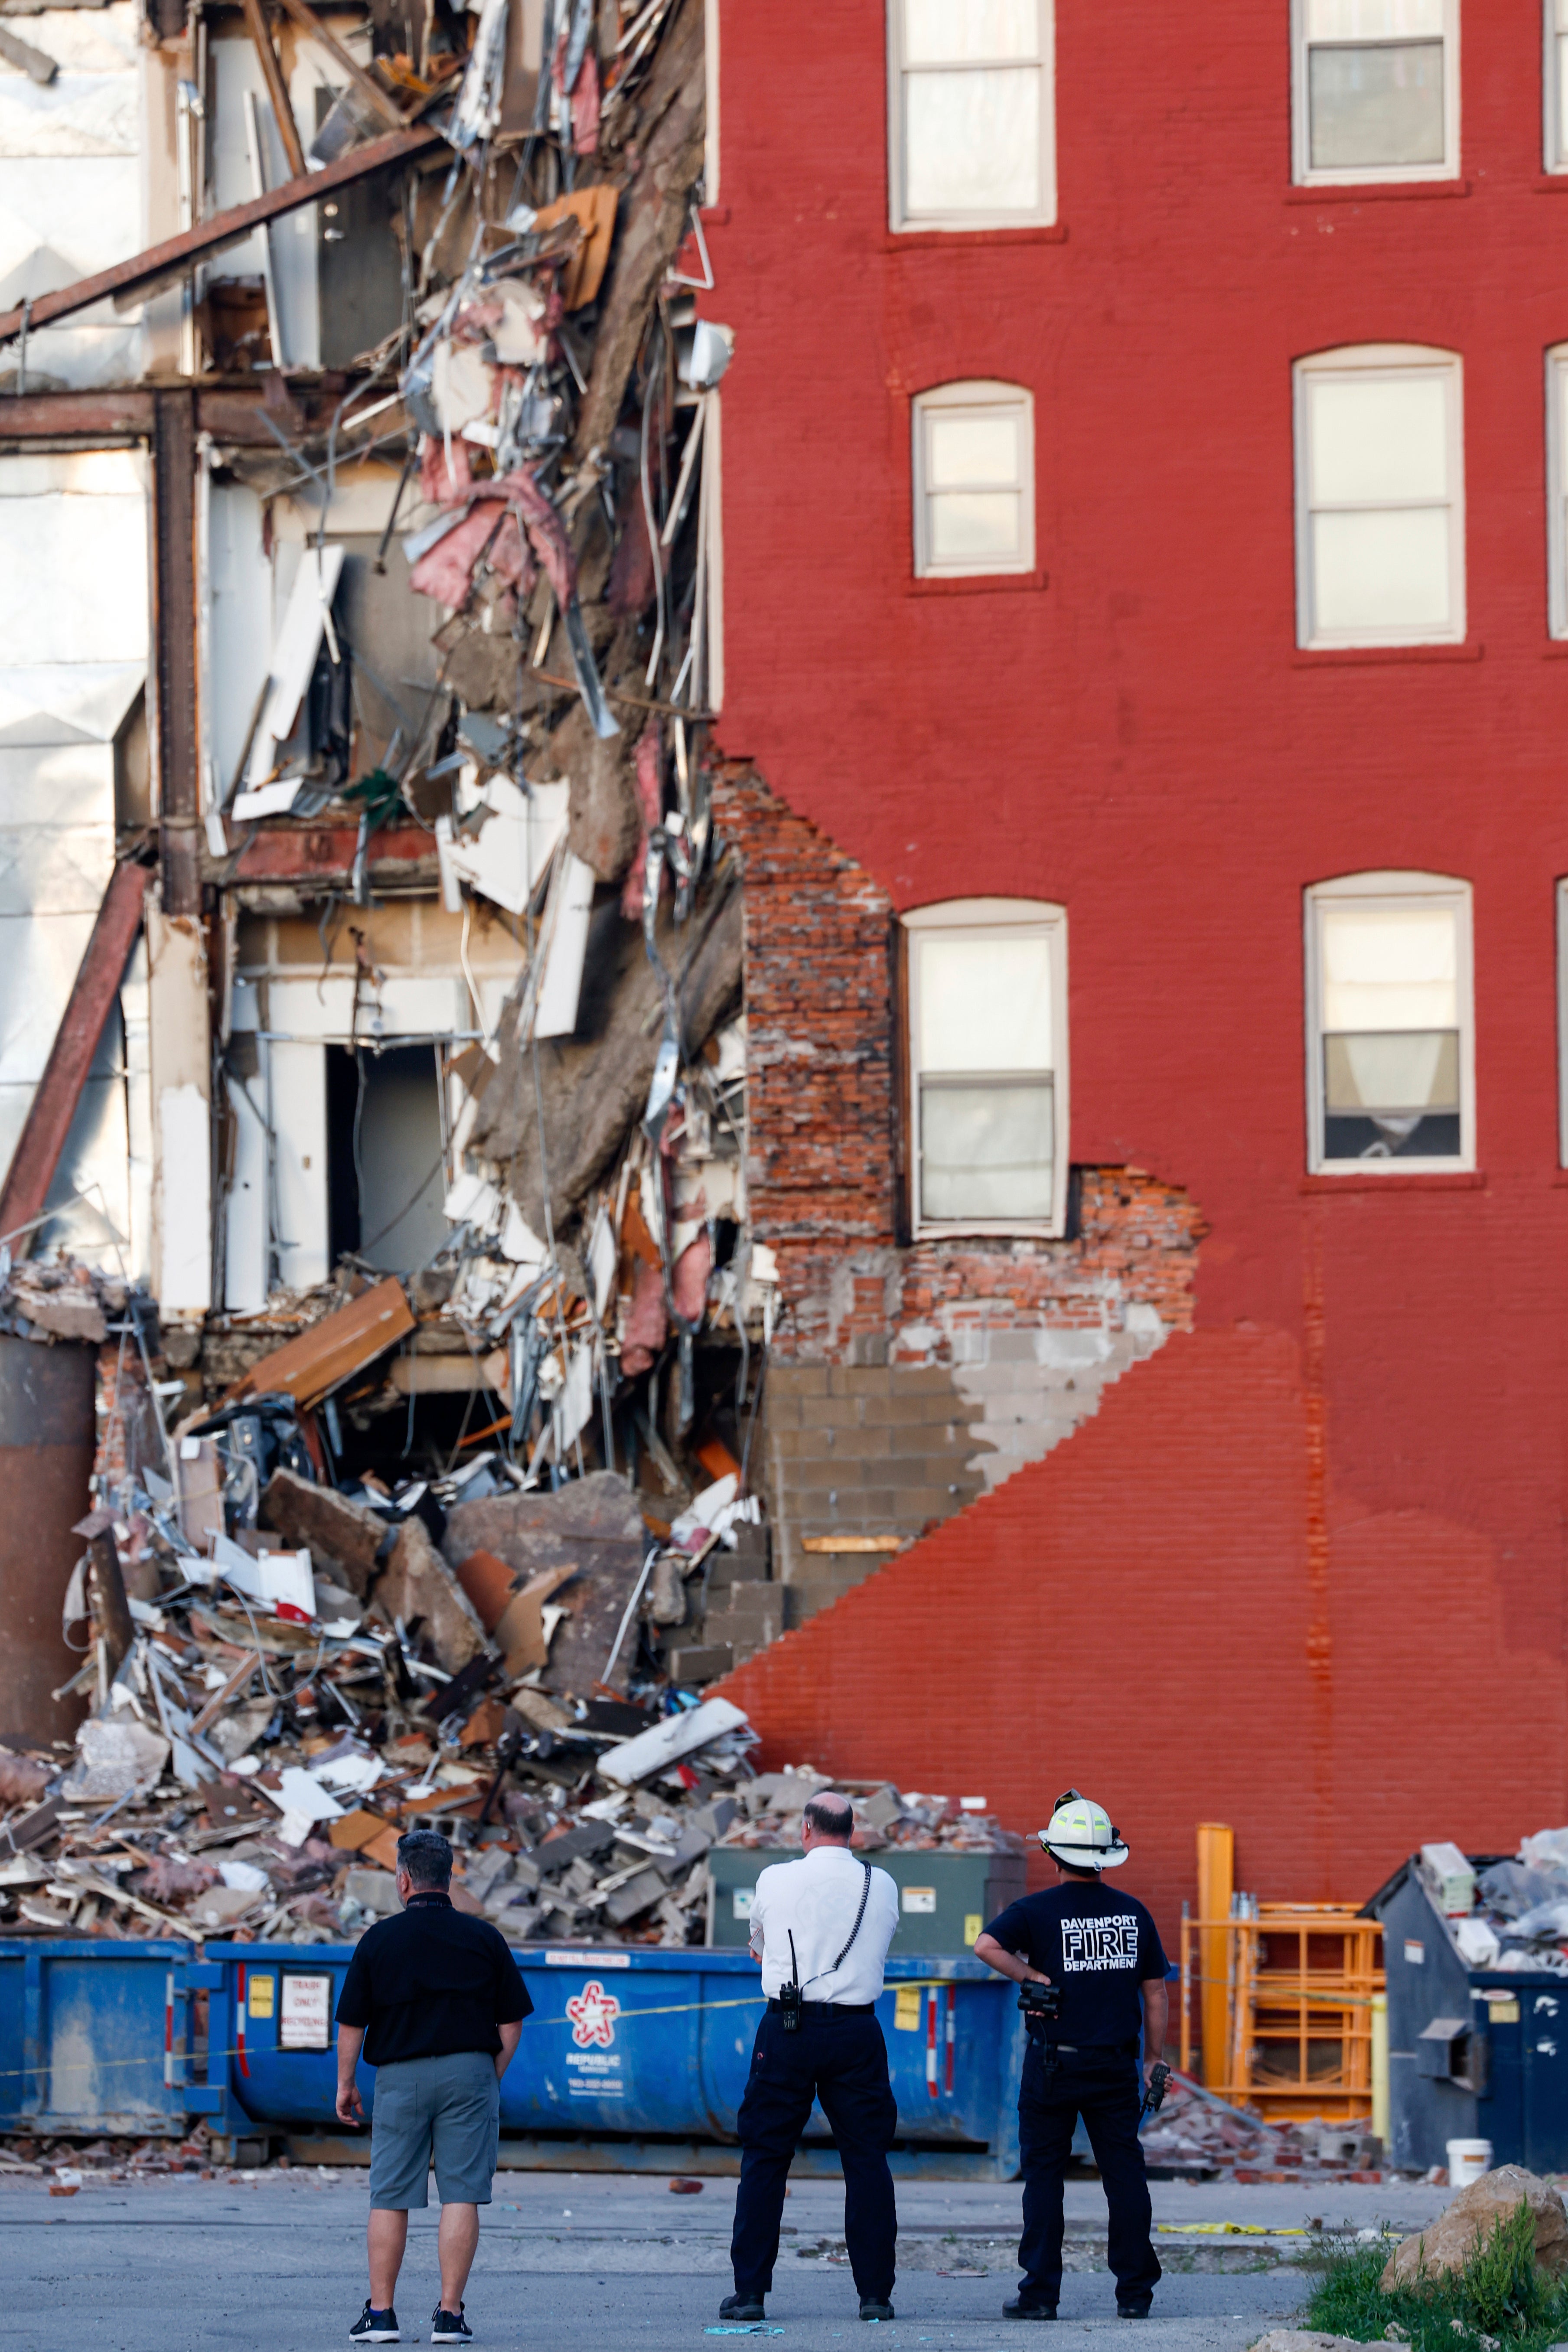 The facade of the red brick building was ripped off, exposing the apartment units inside